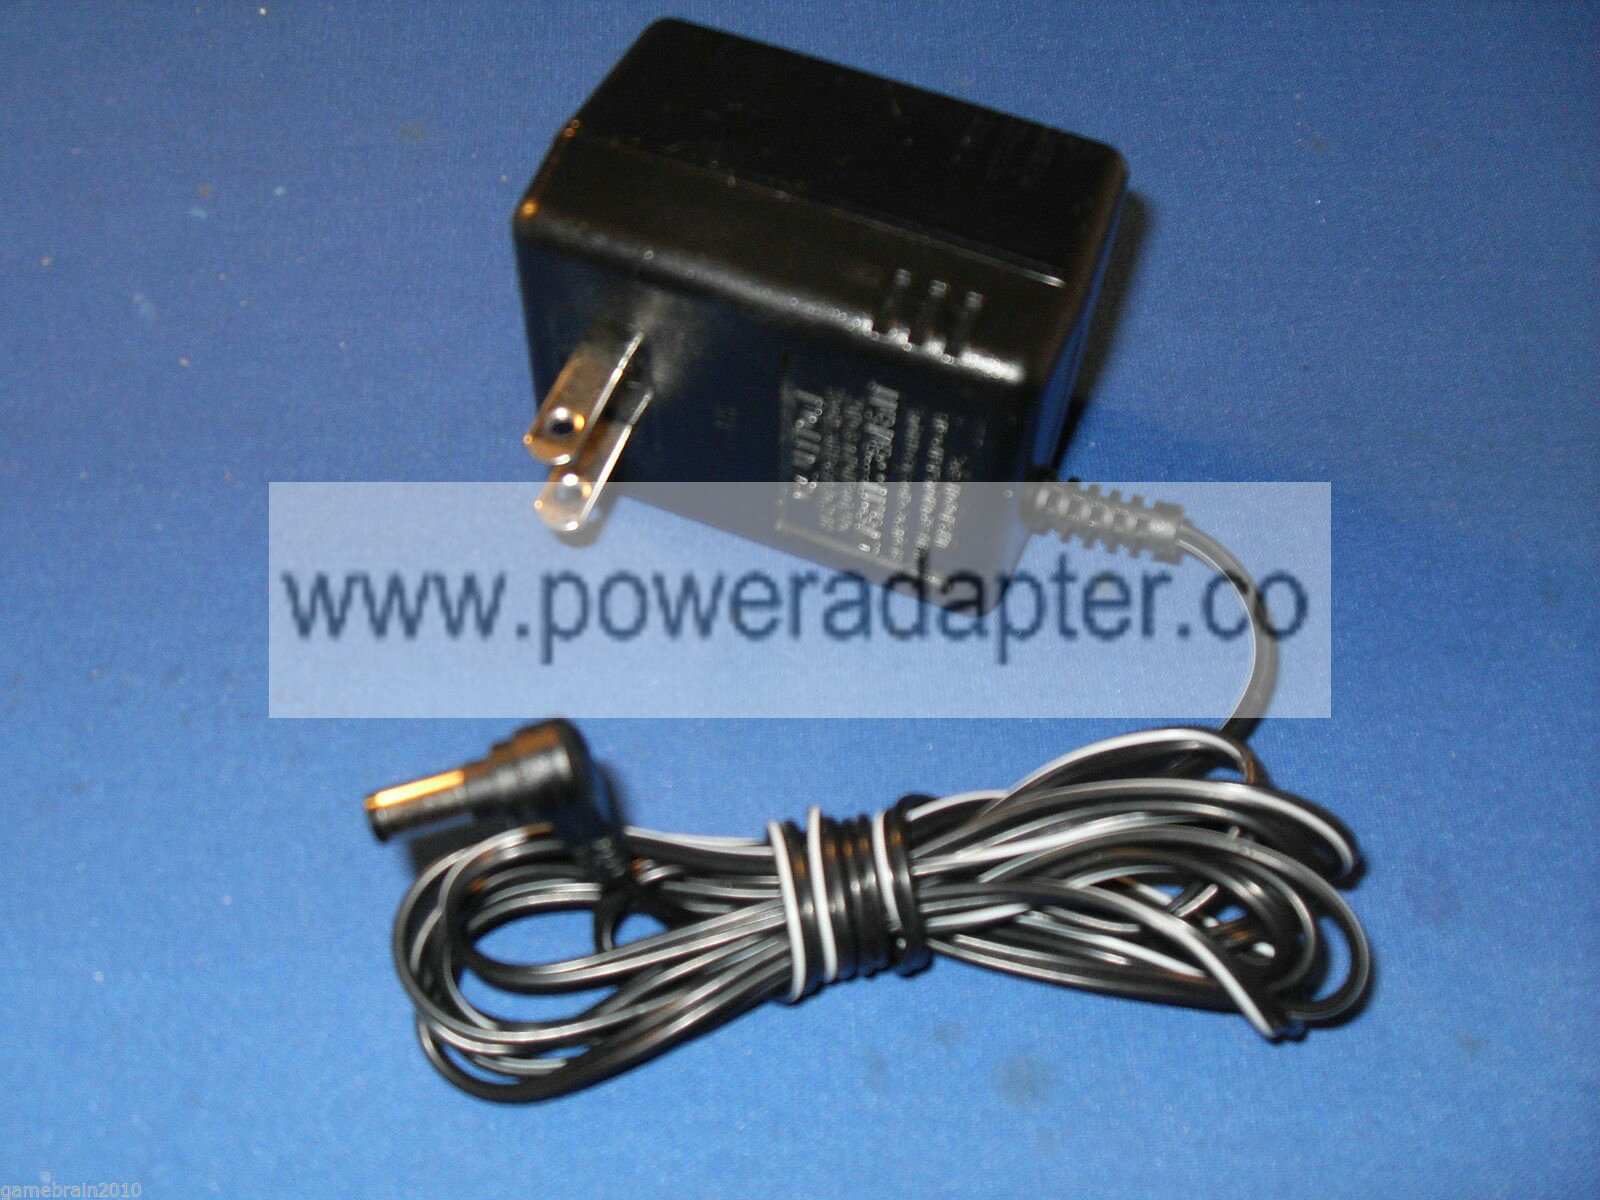 Atlinks USA, model: 5-2512, DC 9V 450mA - AC Adapter This is a listing for an Atlinks USA, model: 5-2512, DC 9V 450m